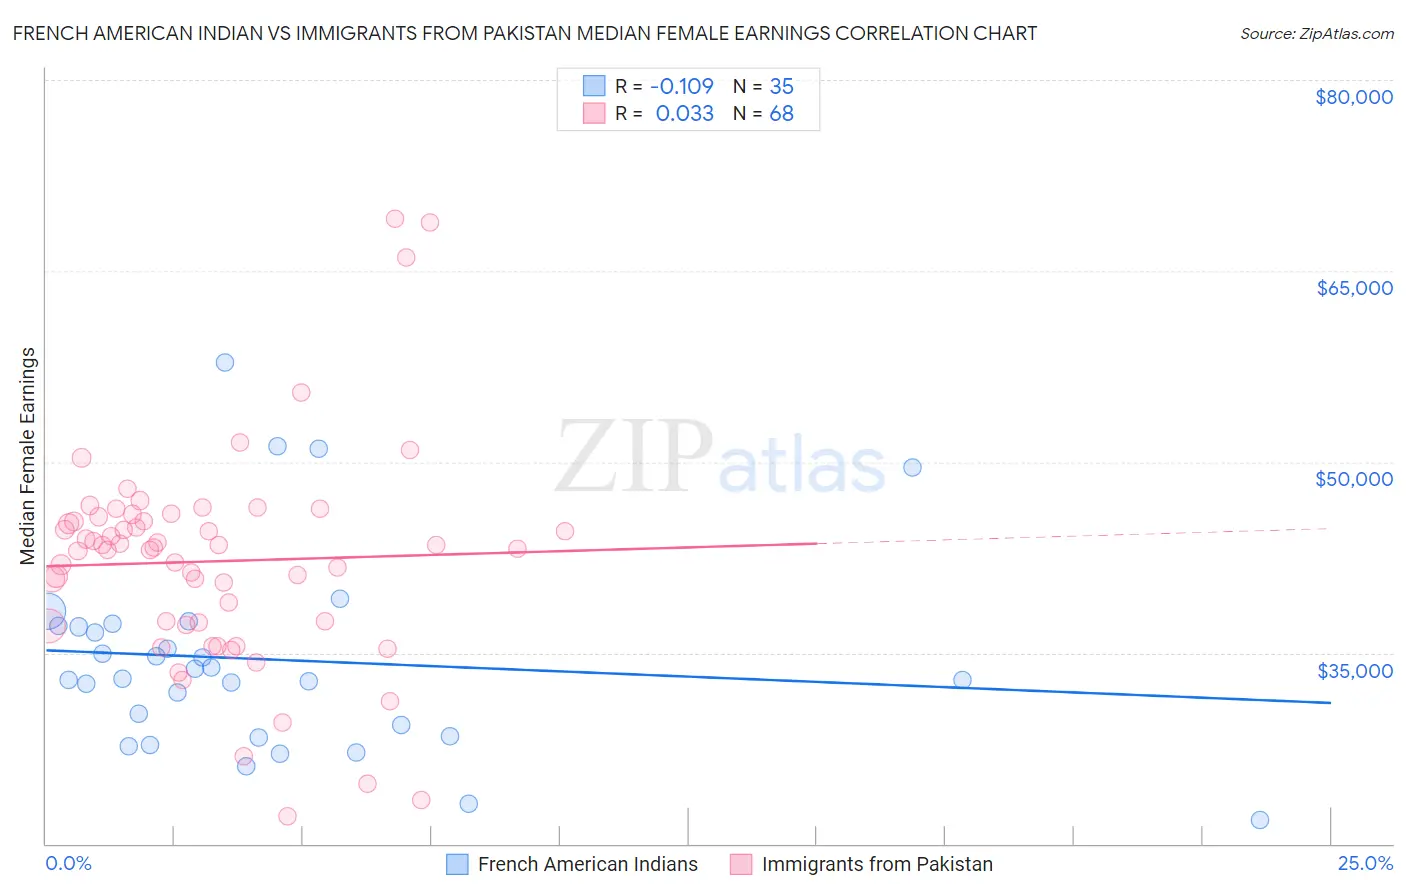 French American Indian vs Immigrants from Pakistan Median Female Earnings